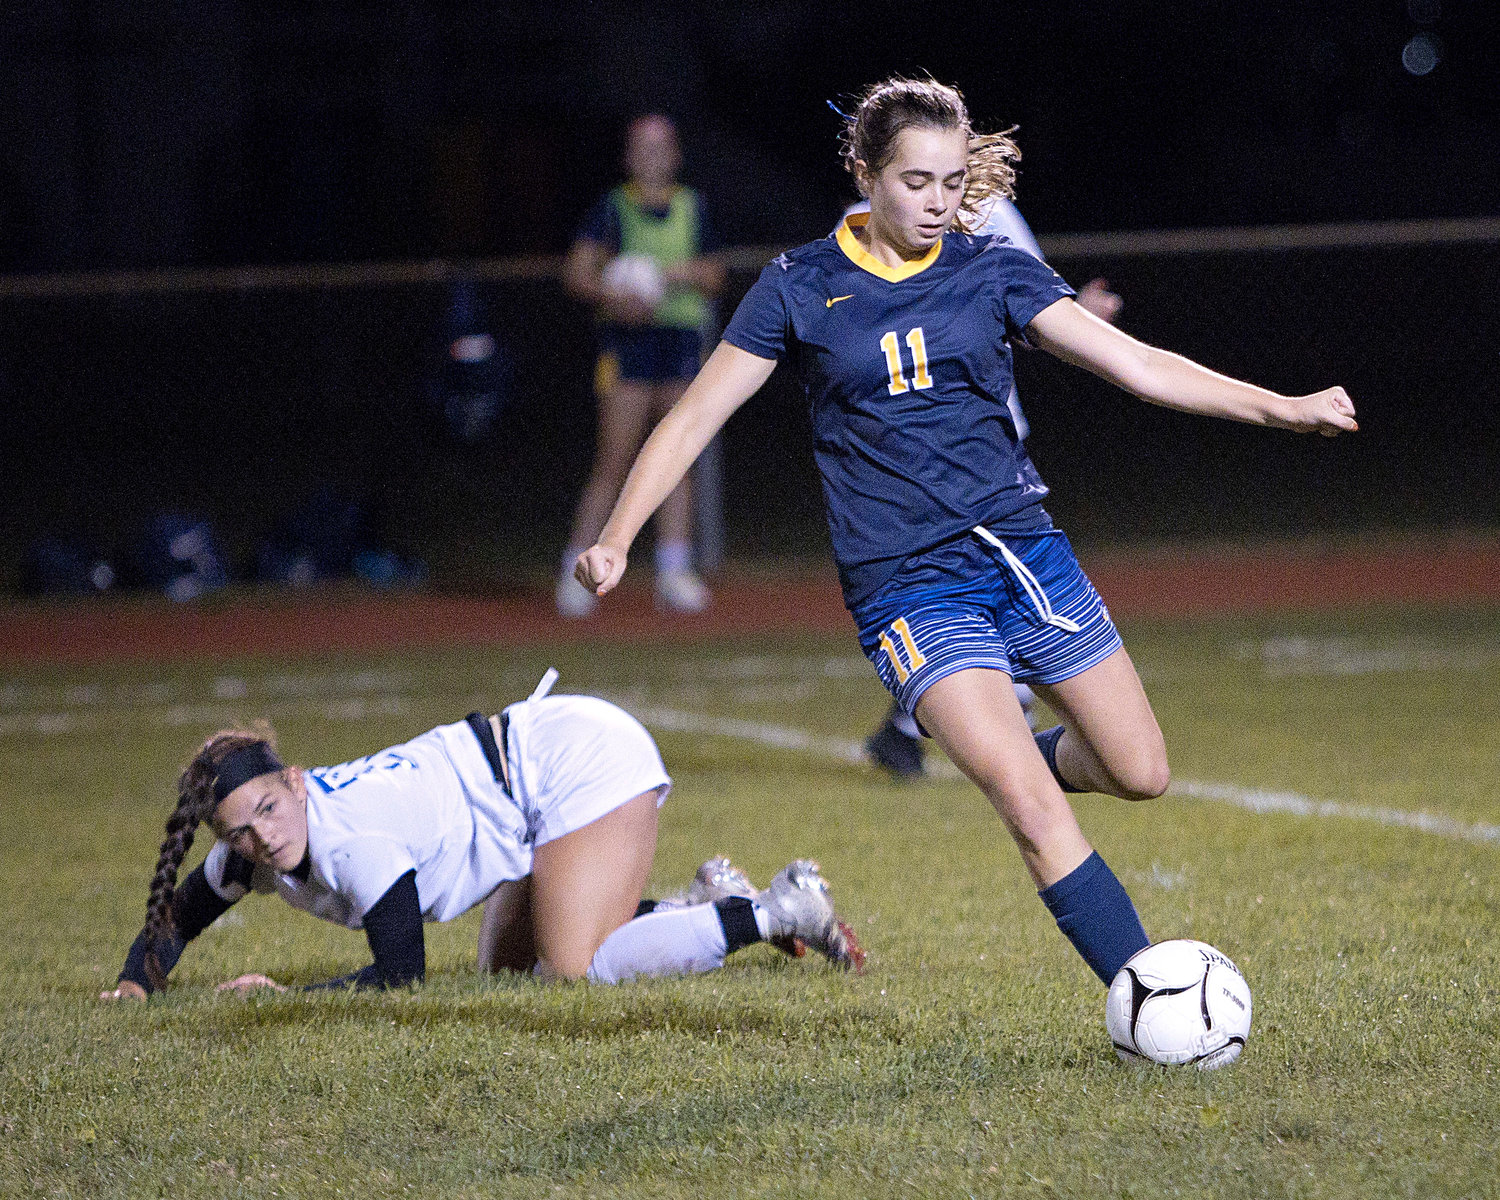 Ella Abadi sends a pass across mid-field during Friday's game against Cumberland.